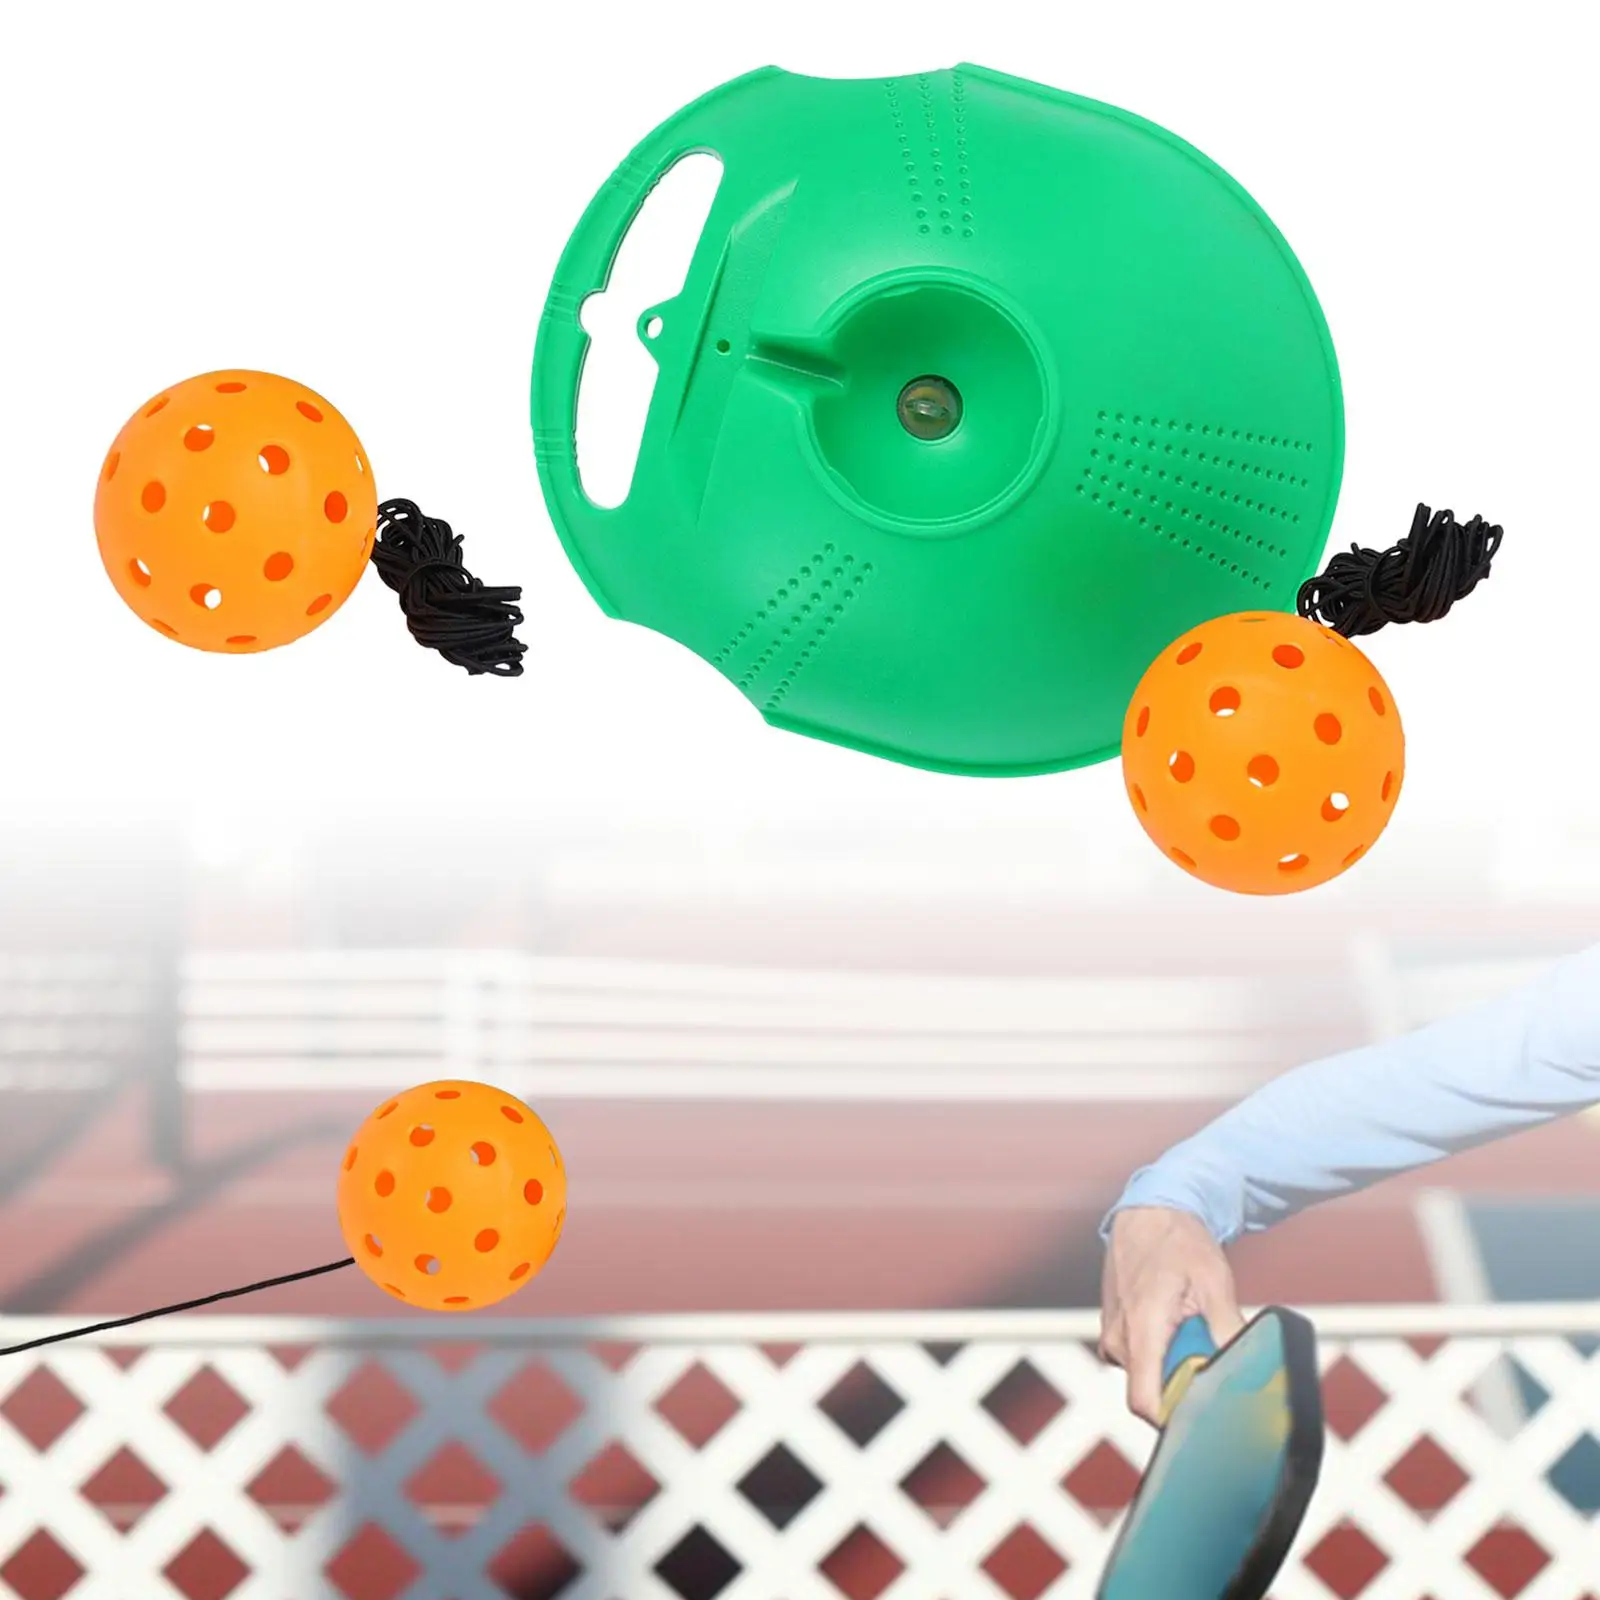 Pickleball Trainer with Pickleball Ball Baseboard Indoor Outdoor Pickleball Training Tool for Exercise Kids Adult Single Player